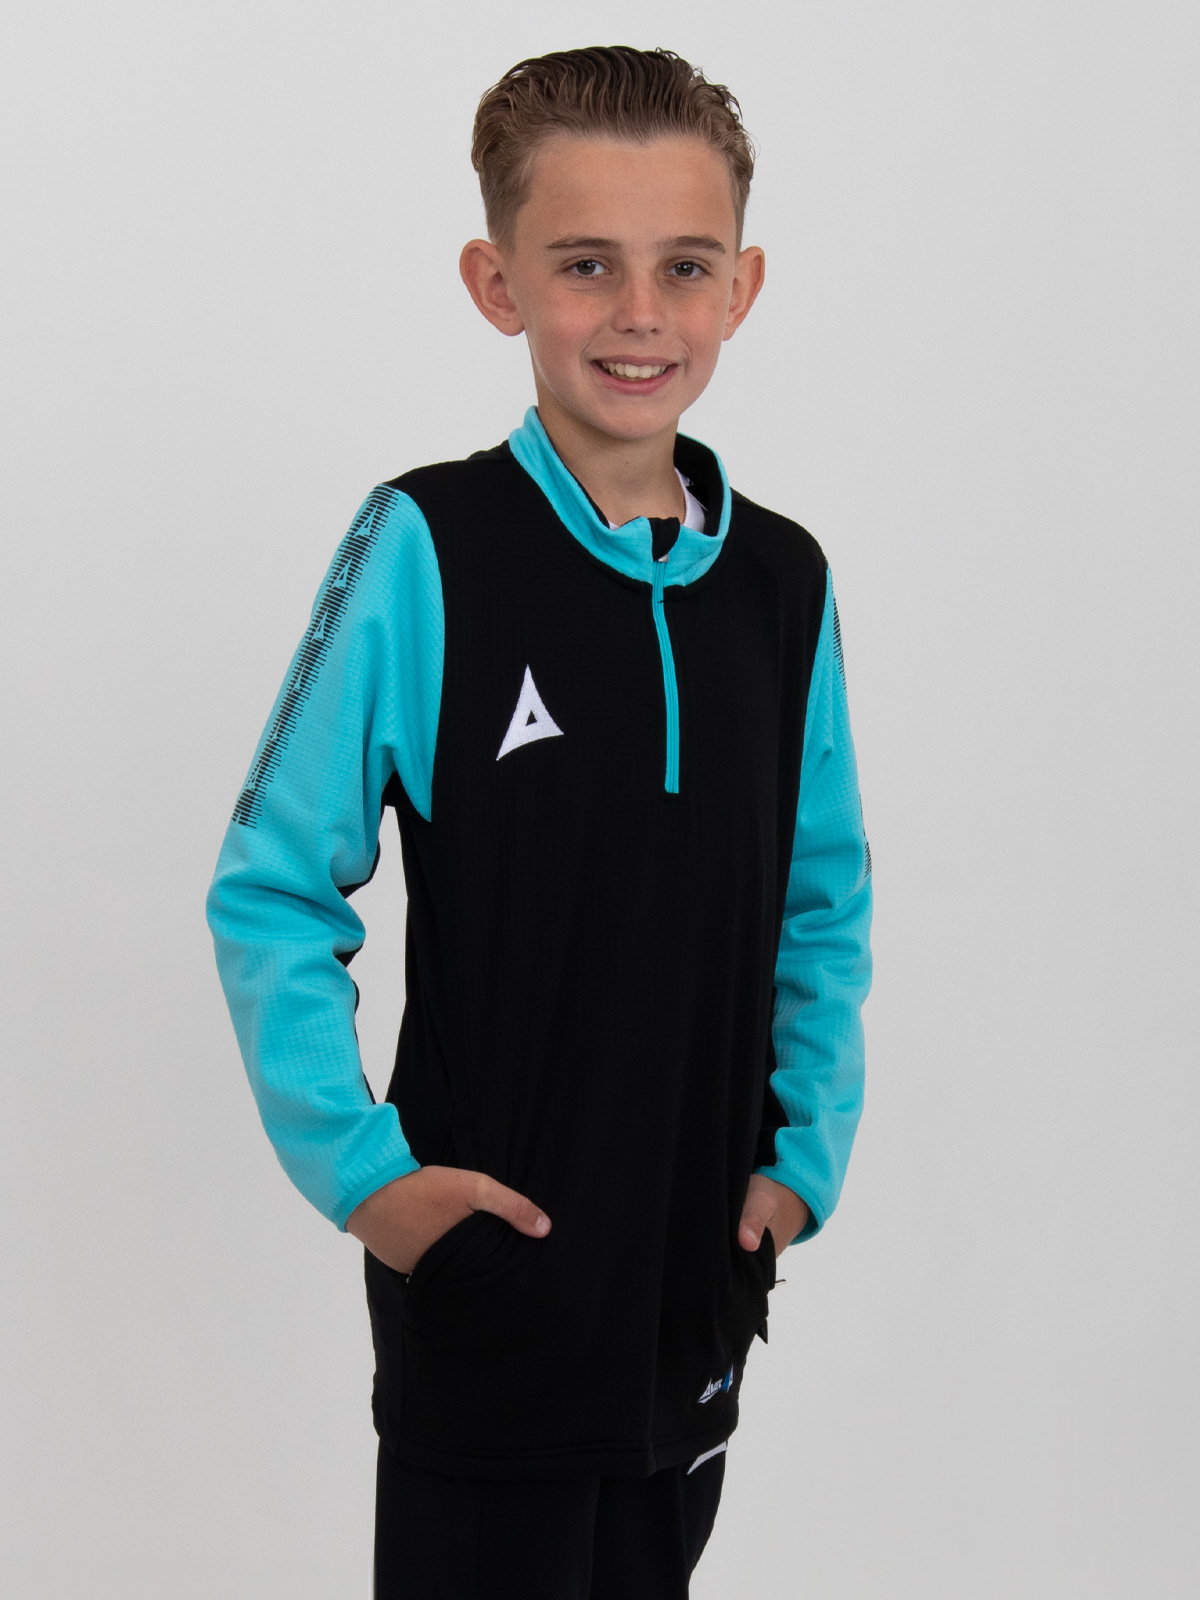 a young child is wearing a black quarter-zip jumper with light blue sleeves